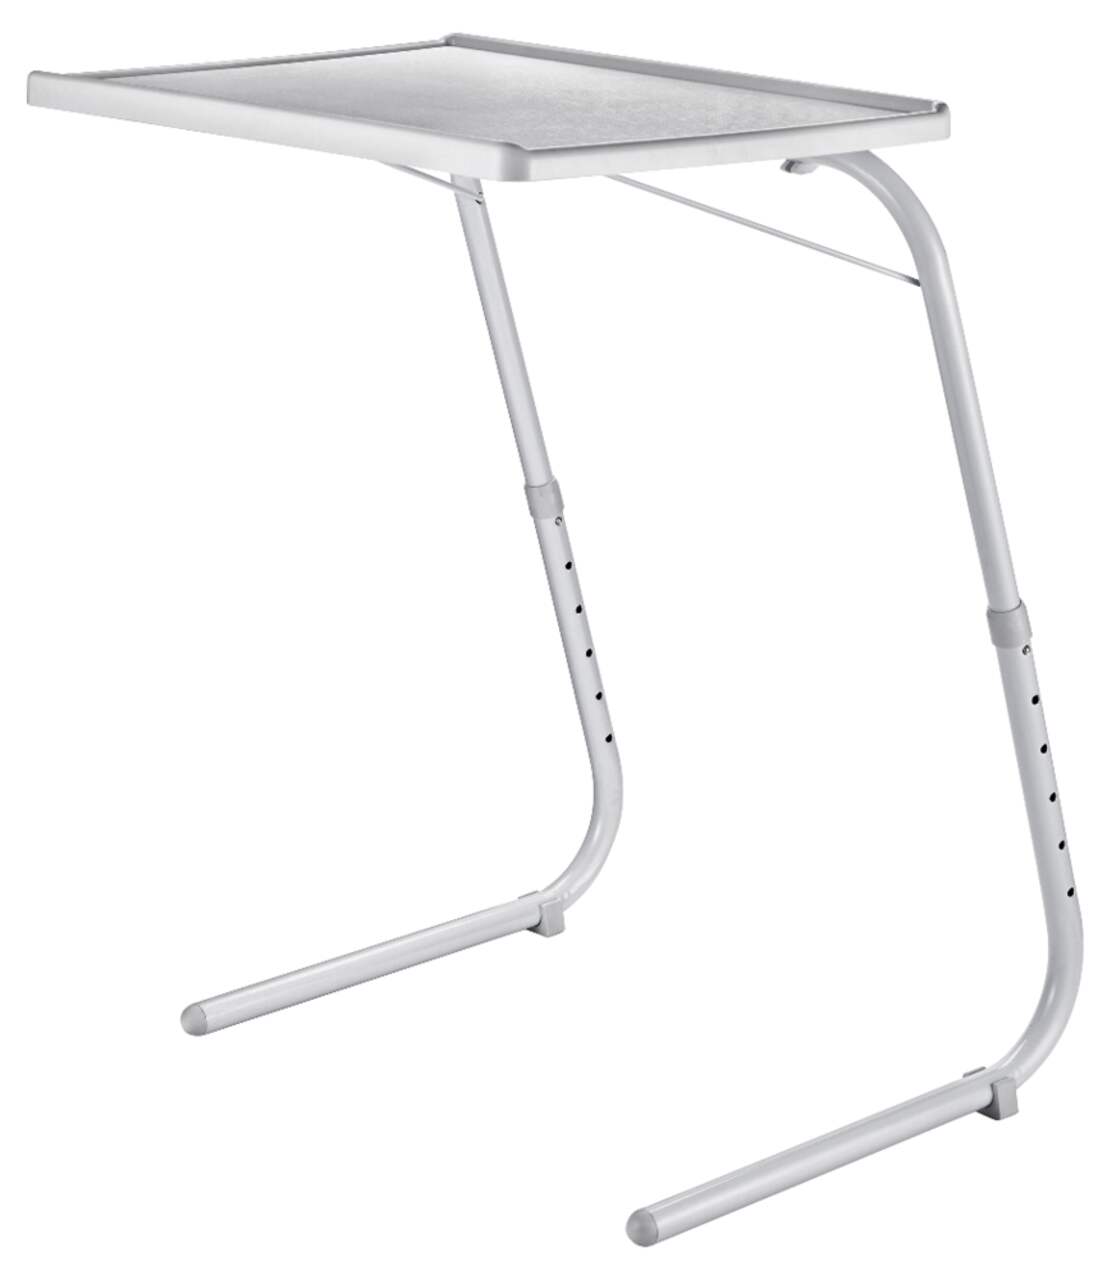 https://media-www.canadiantire.ca/product/living/home-decor/folding-furniture/0680599/tilt-a-table-white--c2fce07d-67d1-4880-8ddf-a329f5d81f42.png?imdensity=1&imwidth=640&impolicy=mZoom